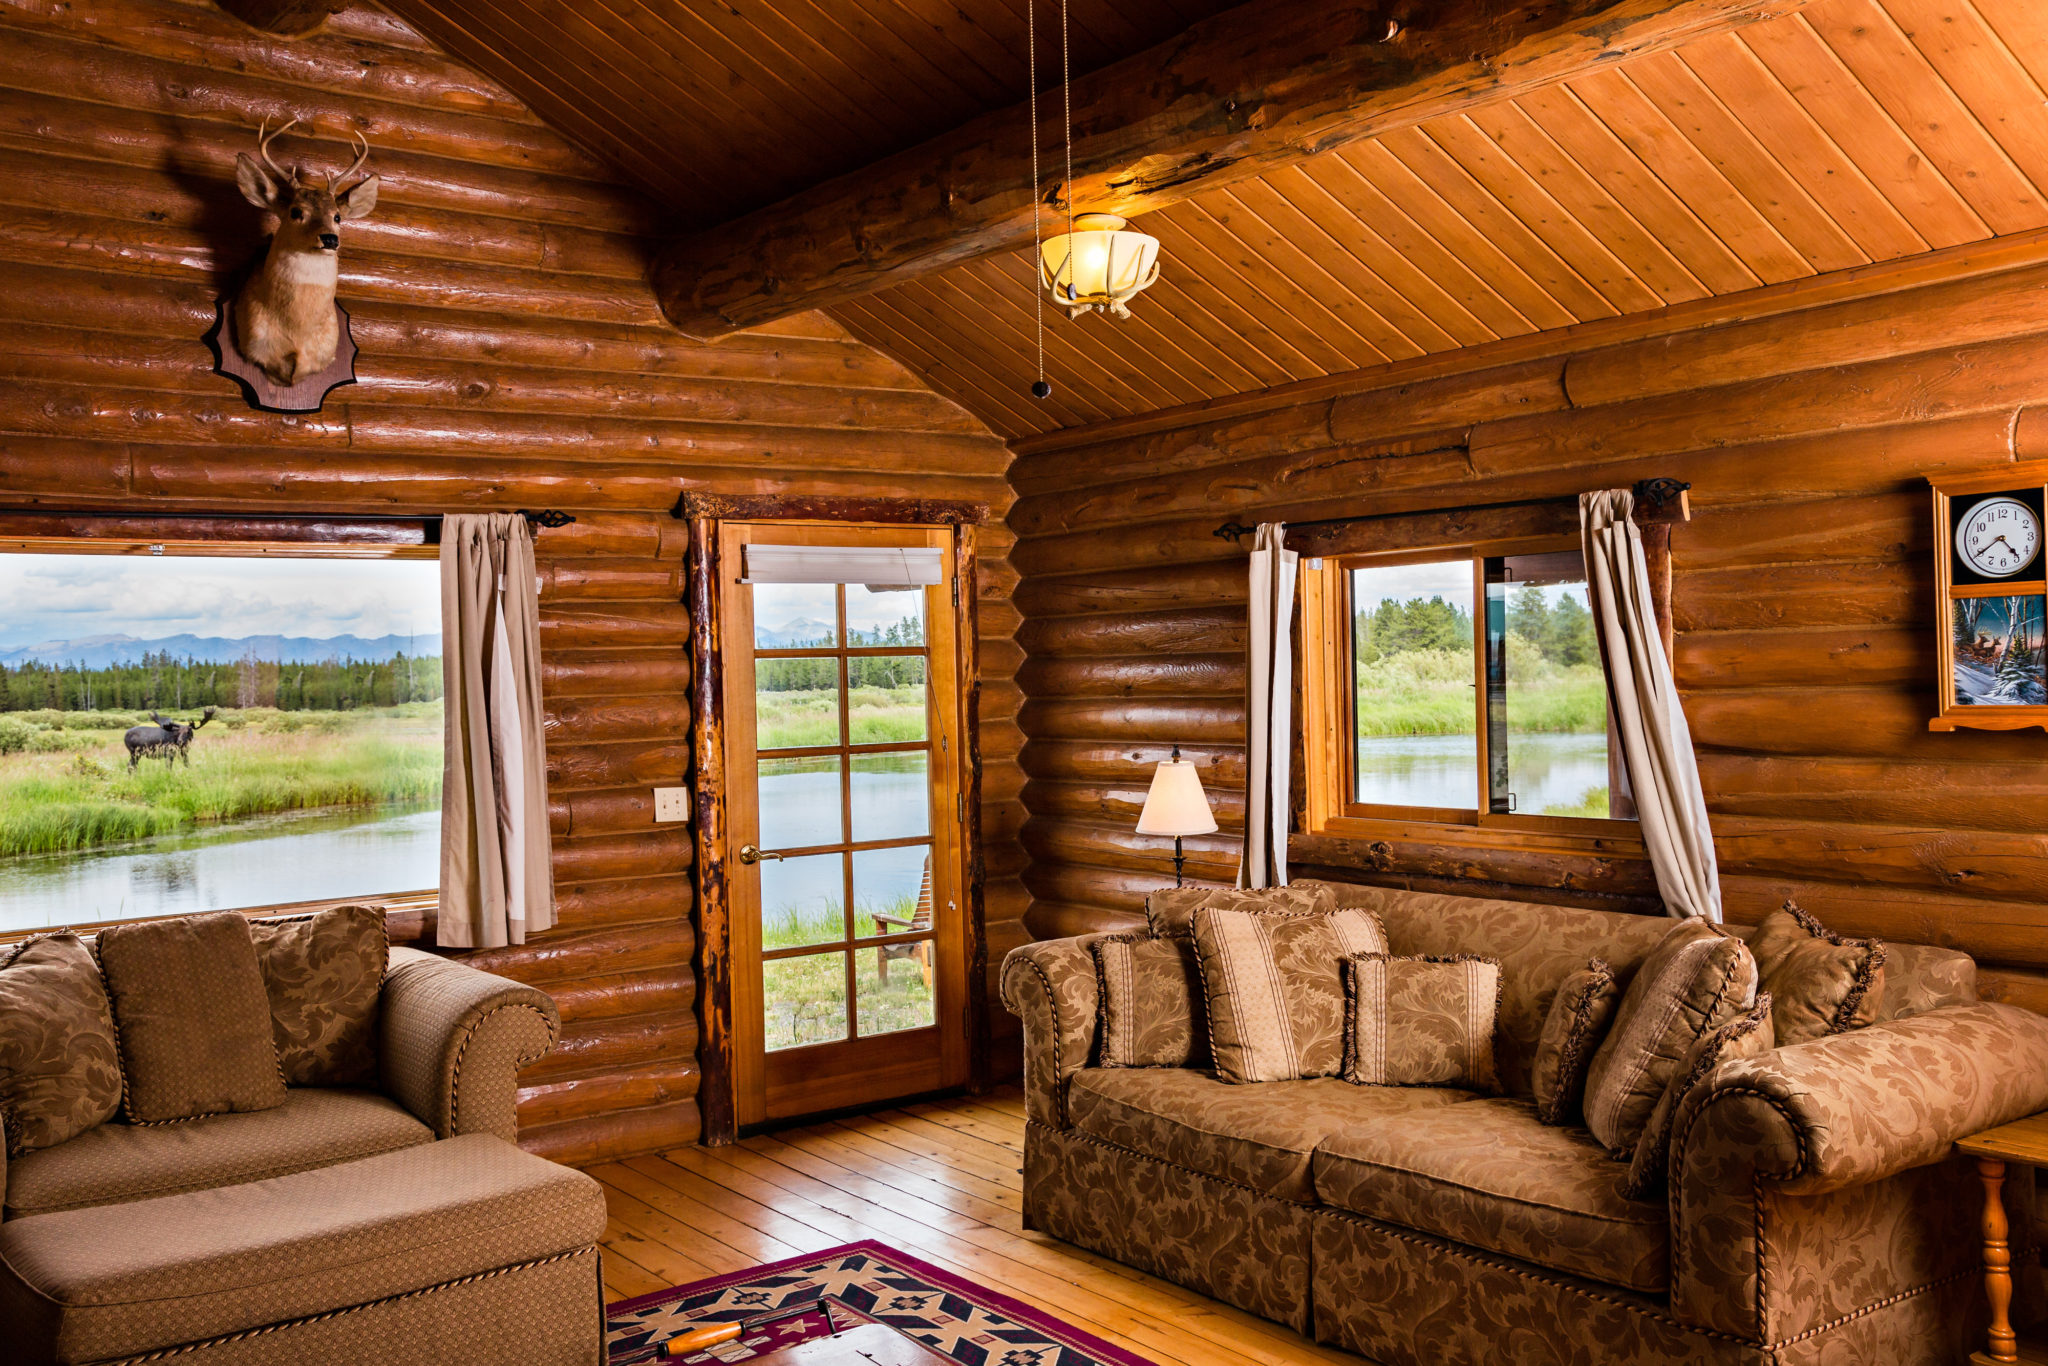 Each of our cabins is situated within a comfortable walking distance of our Main Lodge and Restaurant. We offer our guests refined, spacious cabins featuring a seating area complete with wood-burning fireplace, and all the amenities for a home away from home.